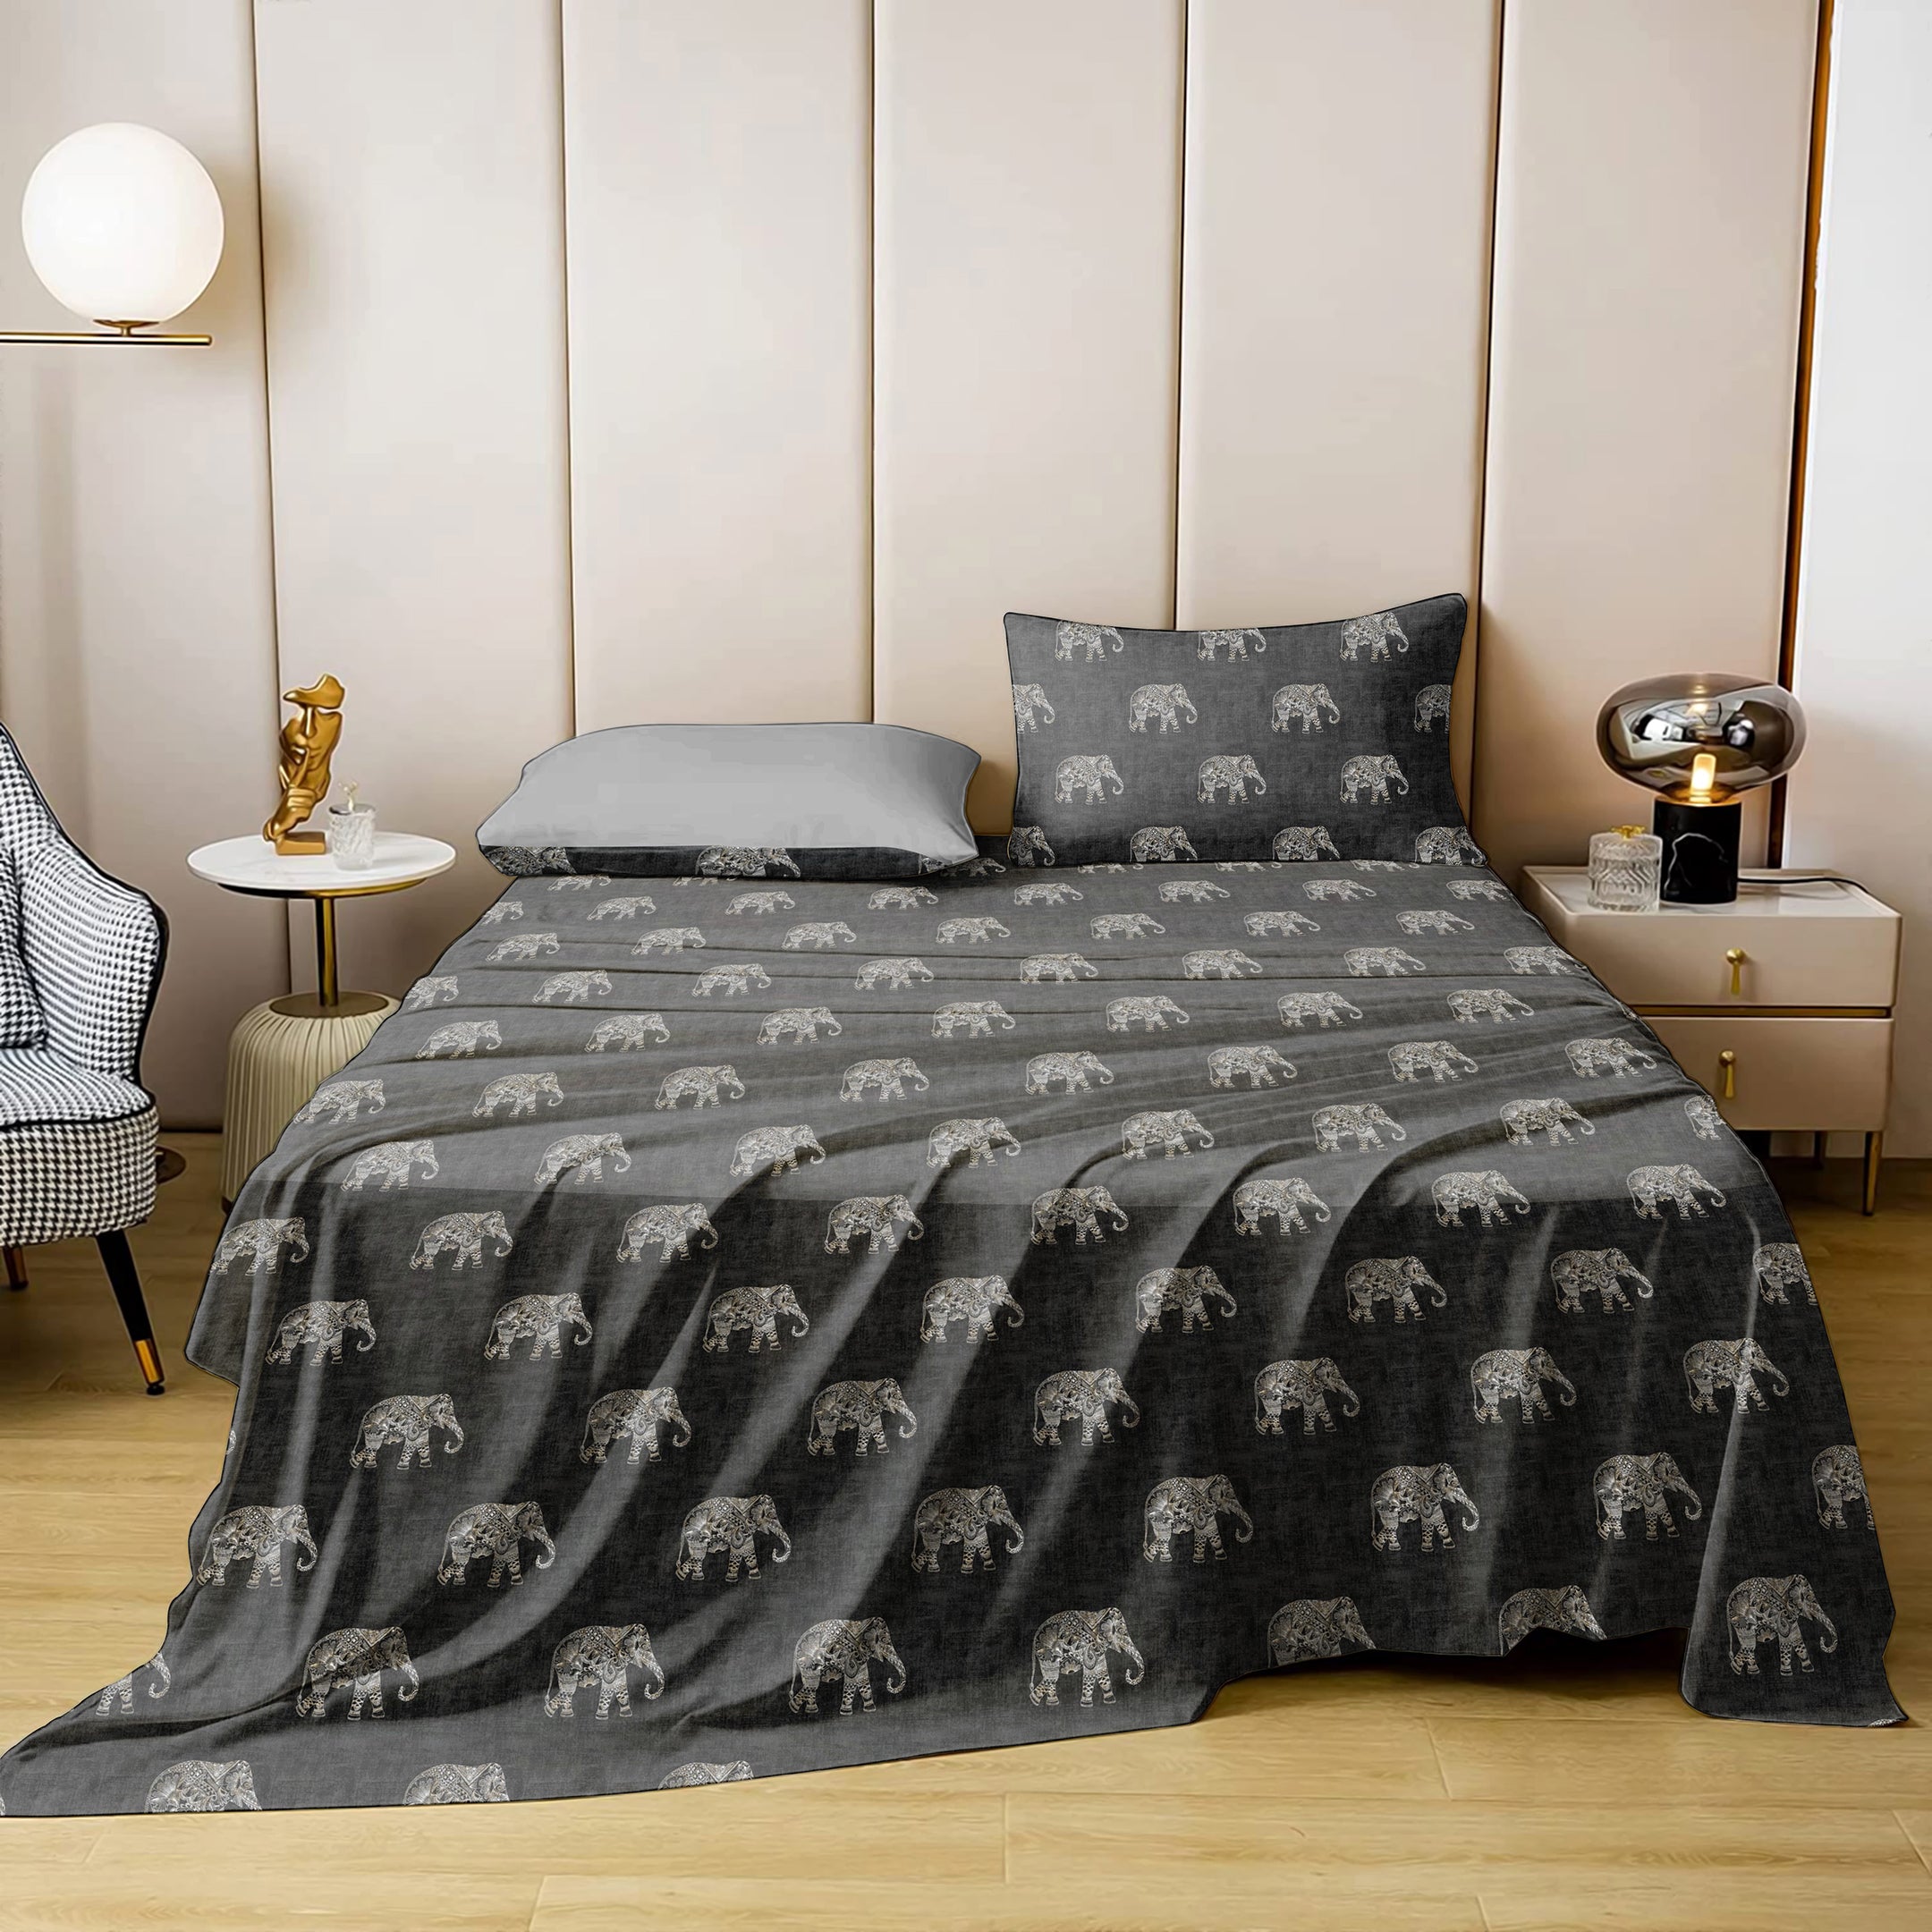 Jodhpur Elephant Bedsheet for Double Bed with 2 PillowCovers King Size (104" X 90") Black